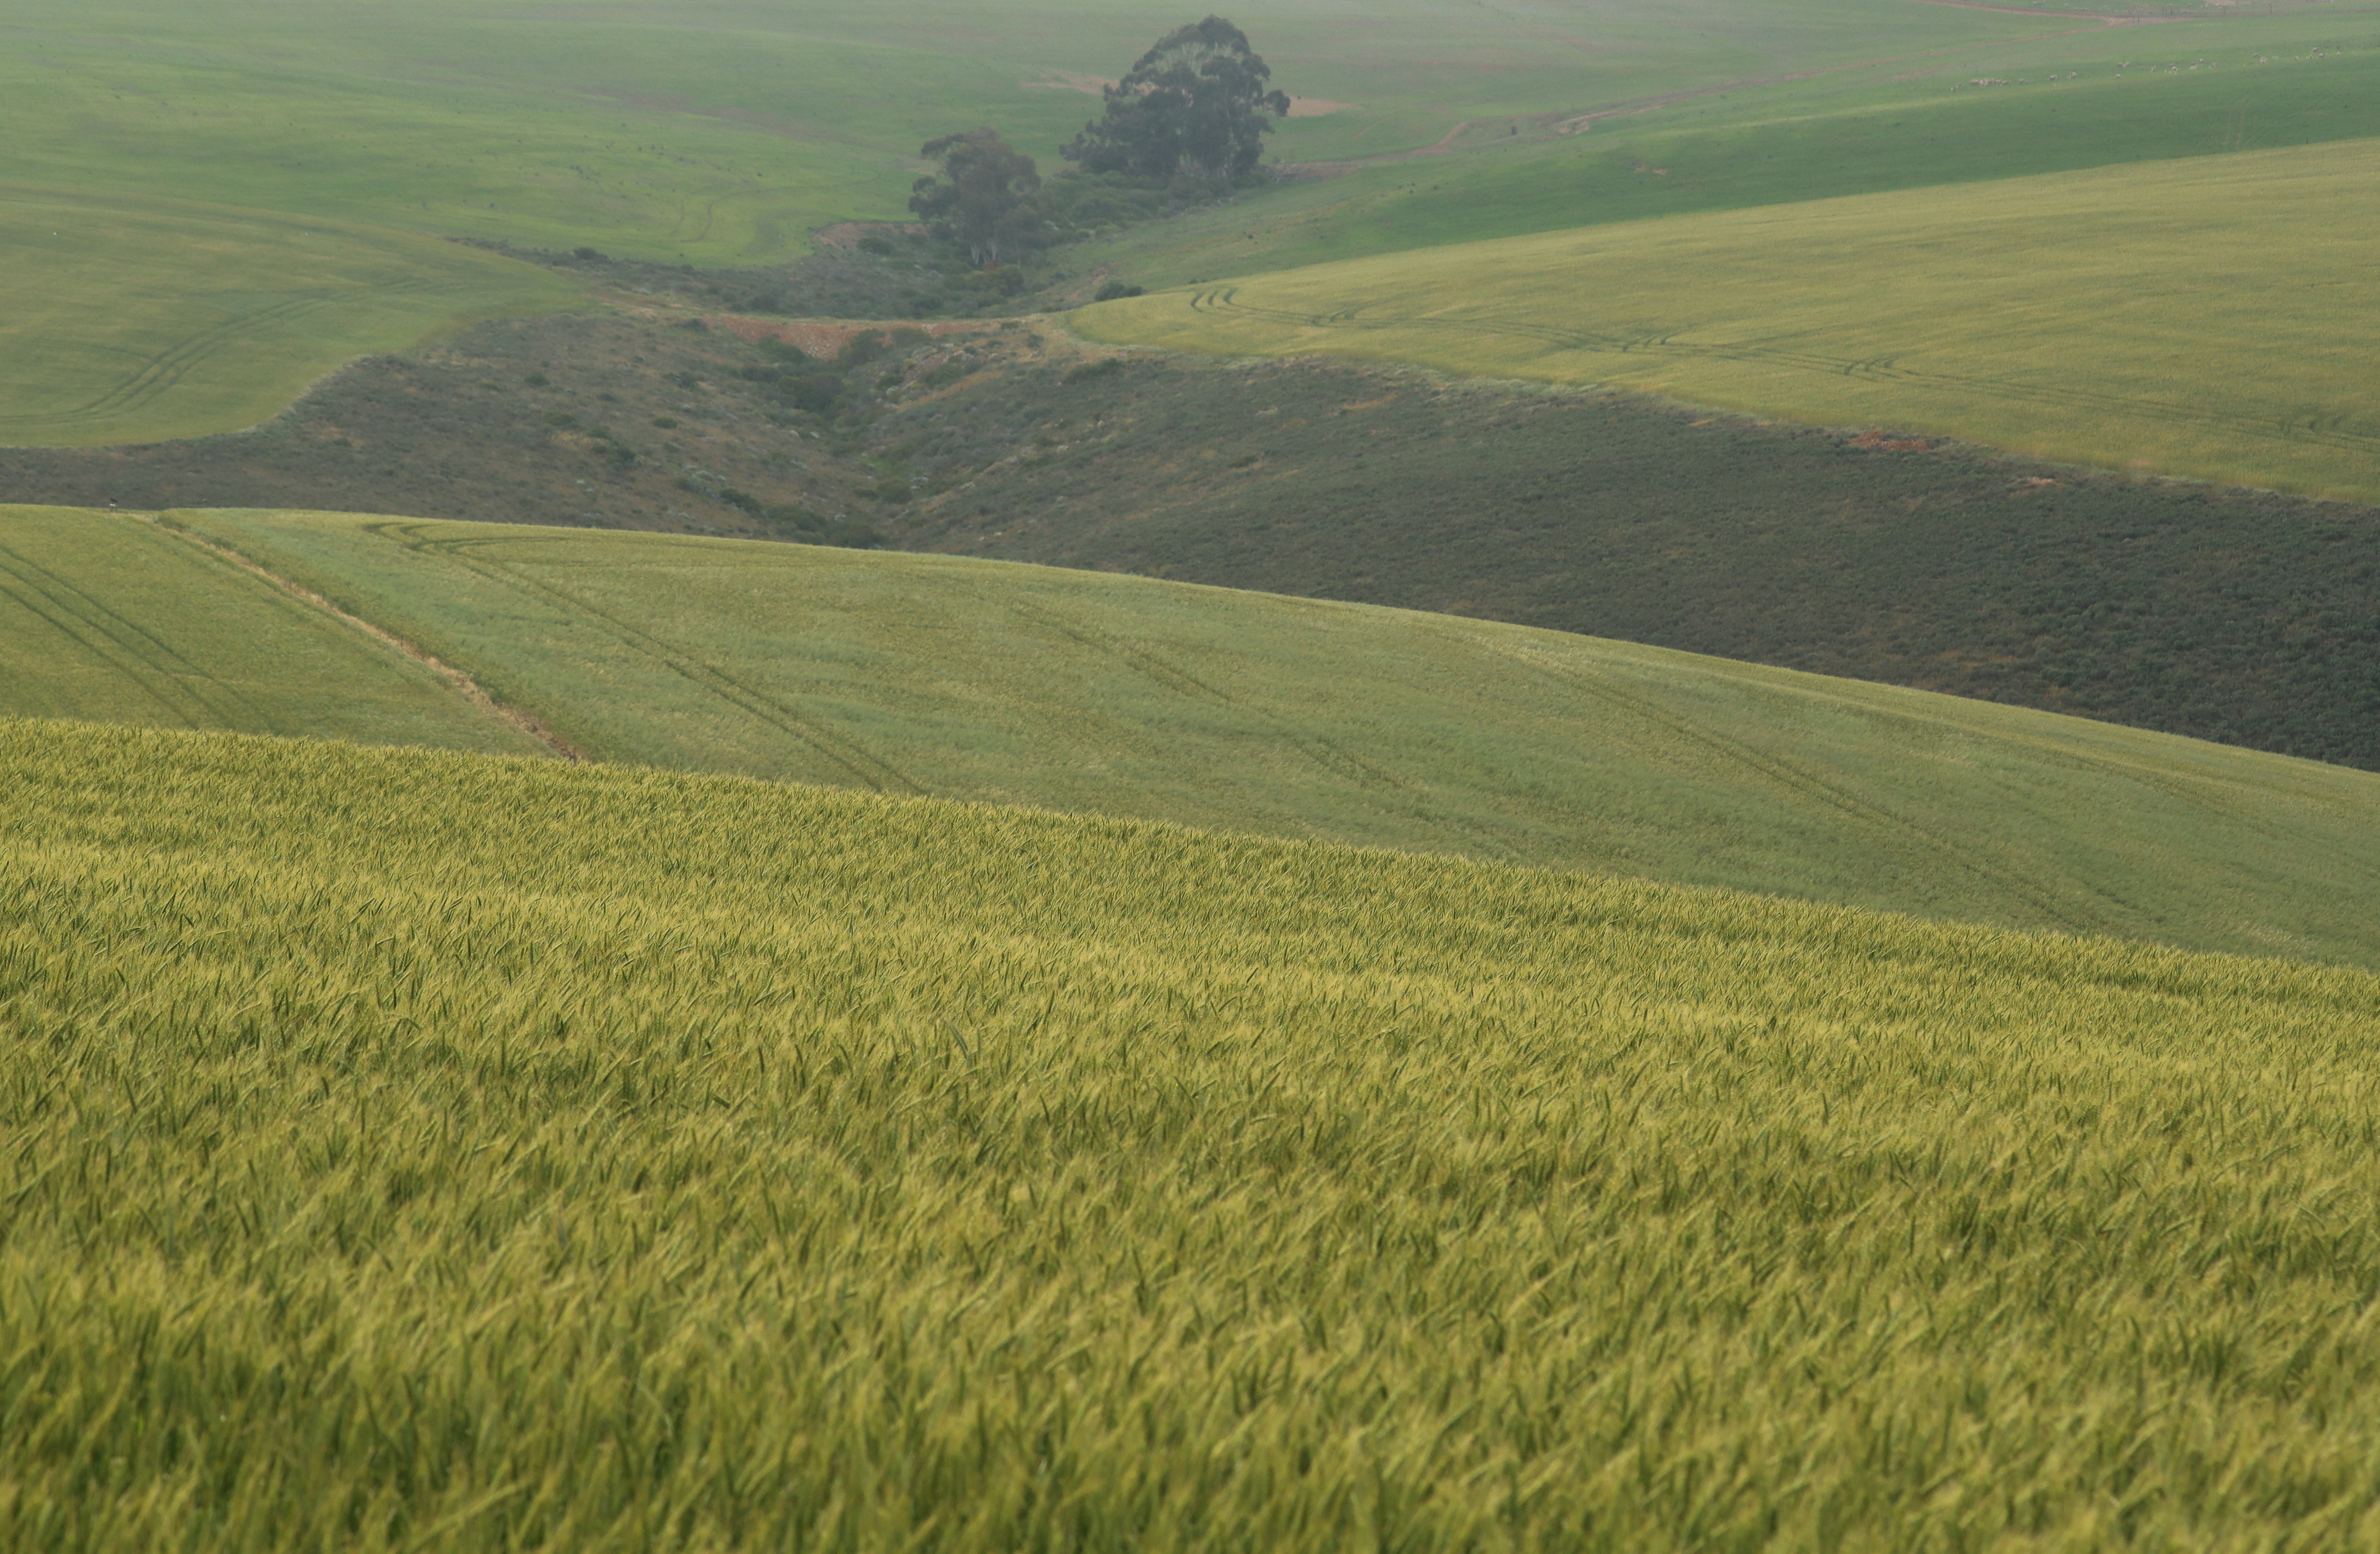 Fields of barley and wheat are seen outside Caledon near Cape Town, South Africa